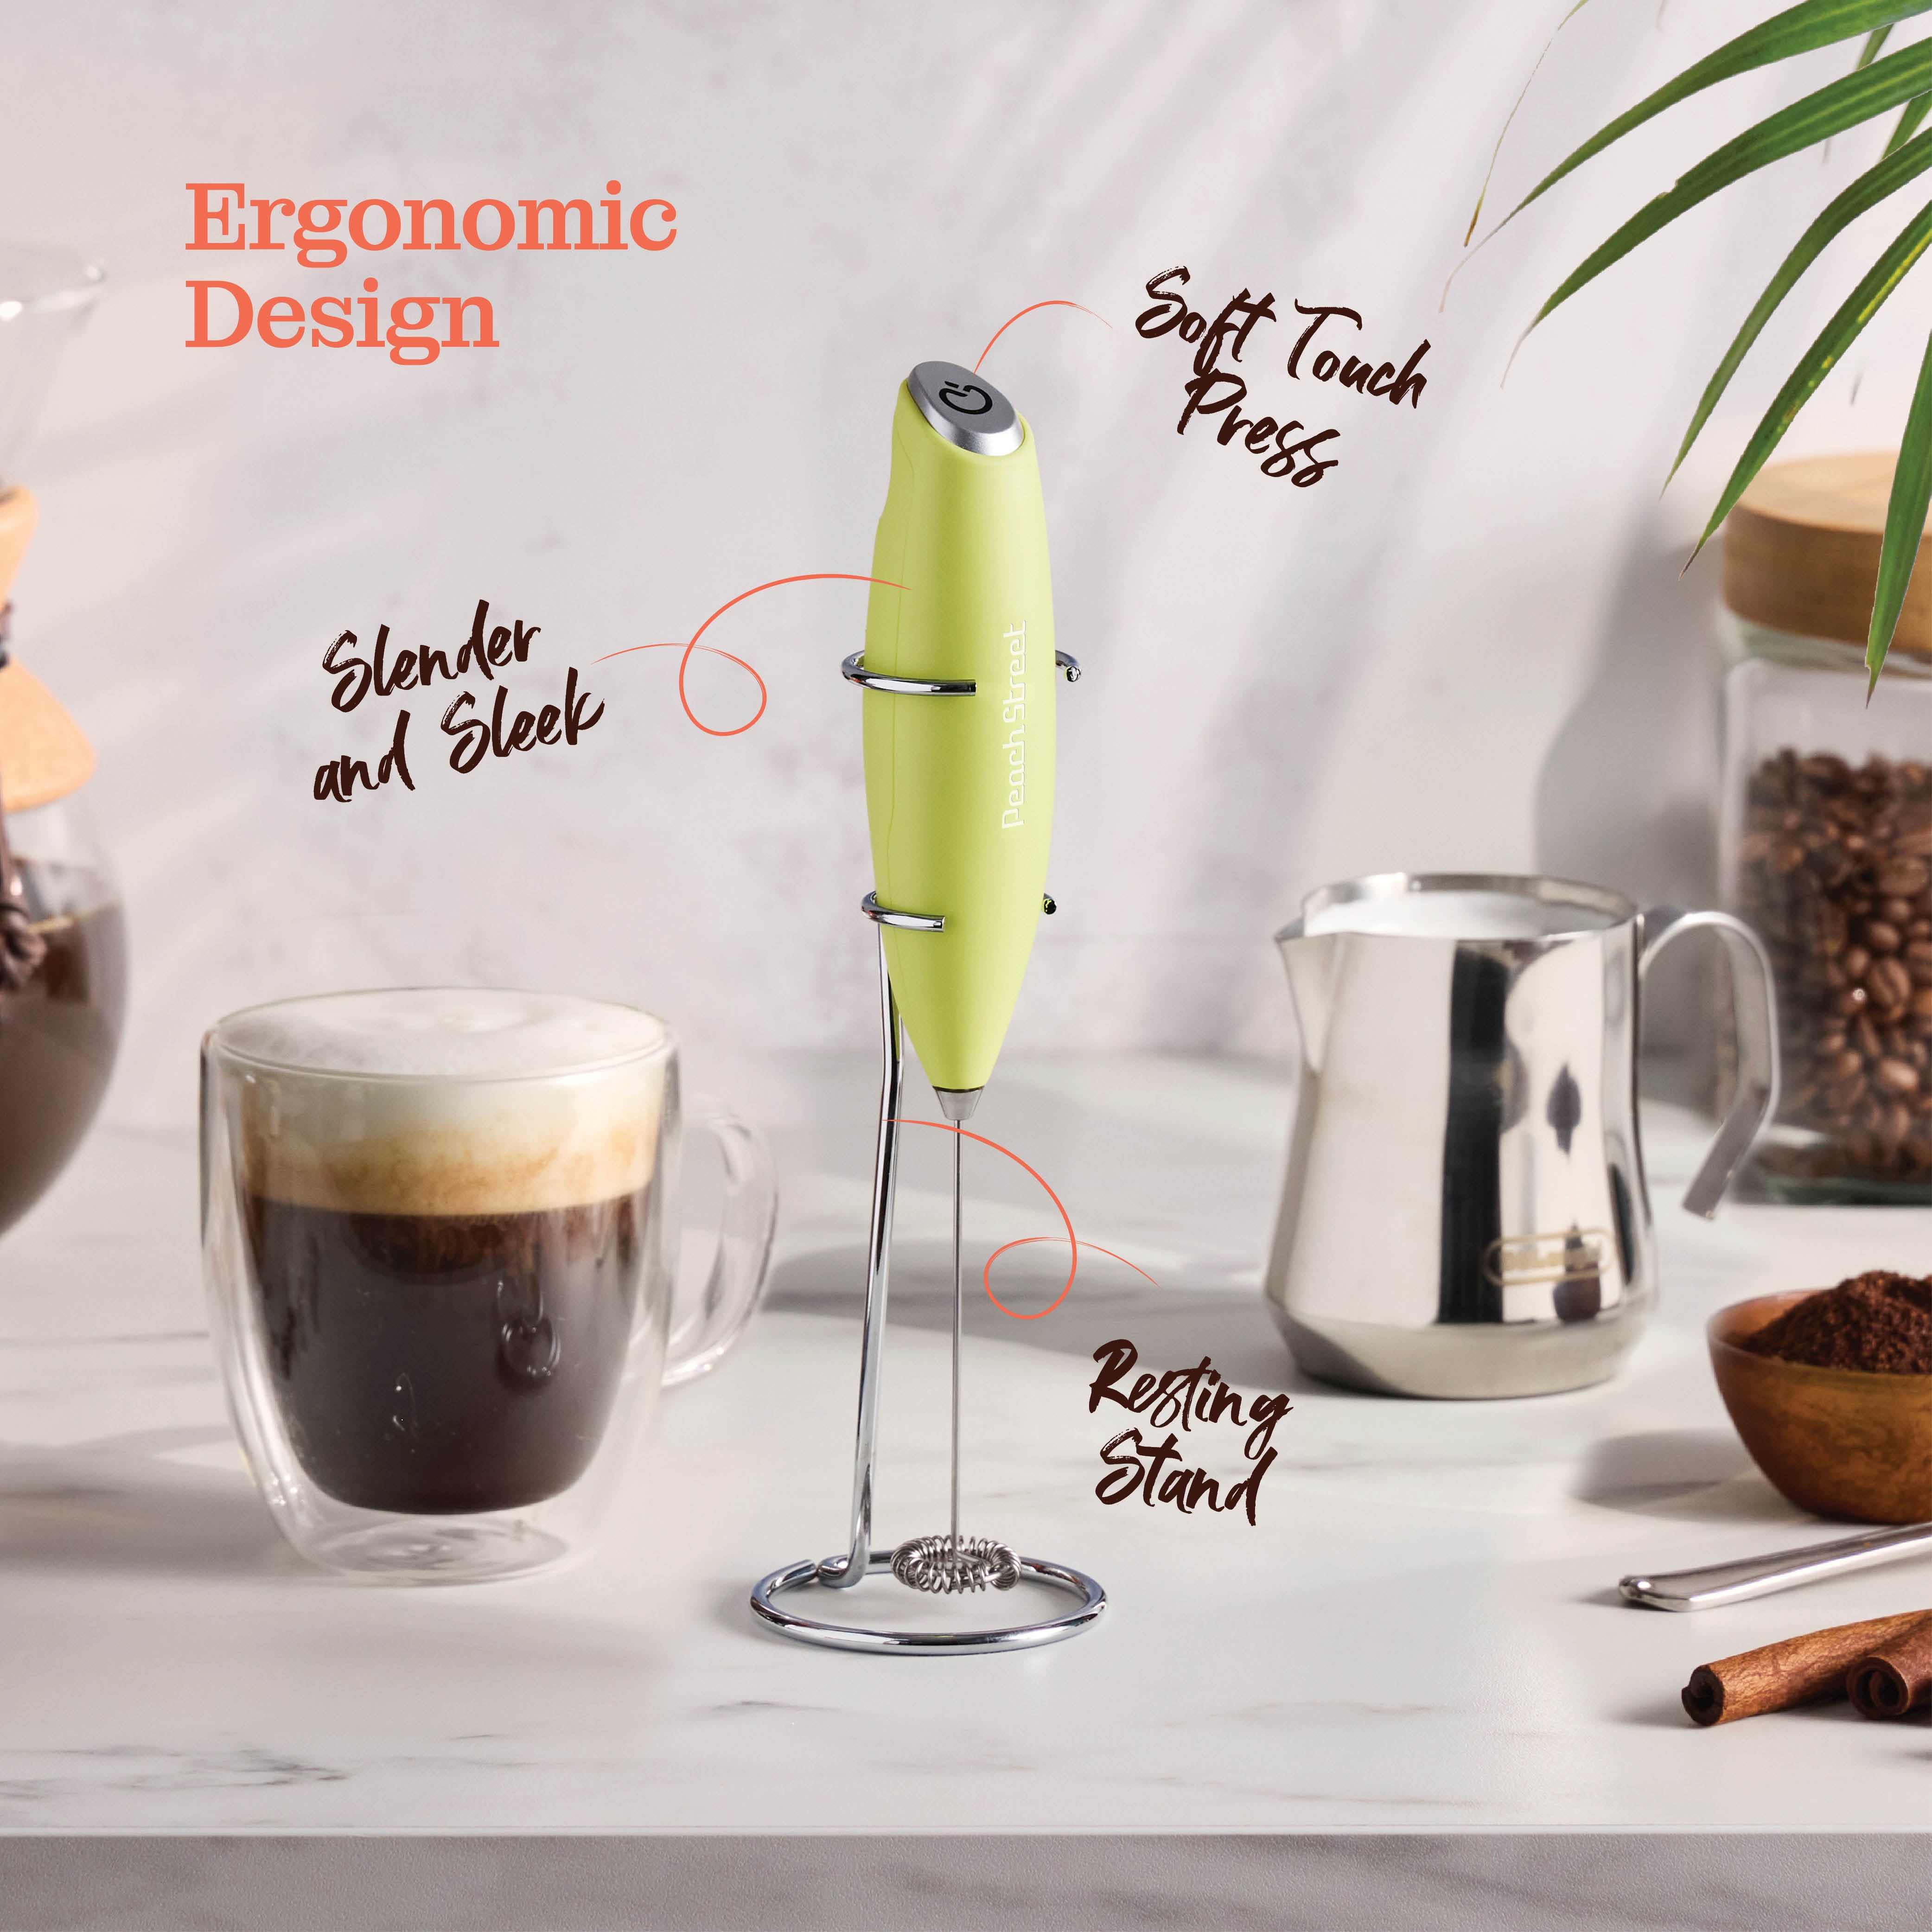 AIRITO Milk Frother Handheld Rechargeable with Stand: Mini Whisk Drink  Mixer for Lattes Matcha Frappe Cappuccino and Hot Chocolate by Milk Boss